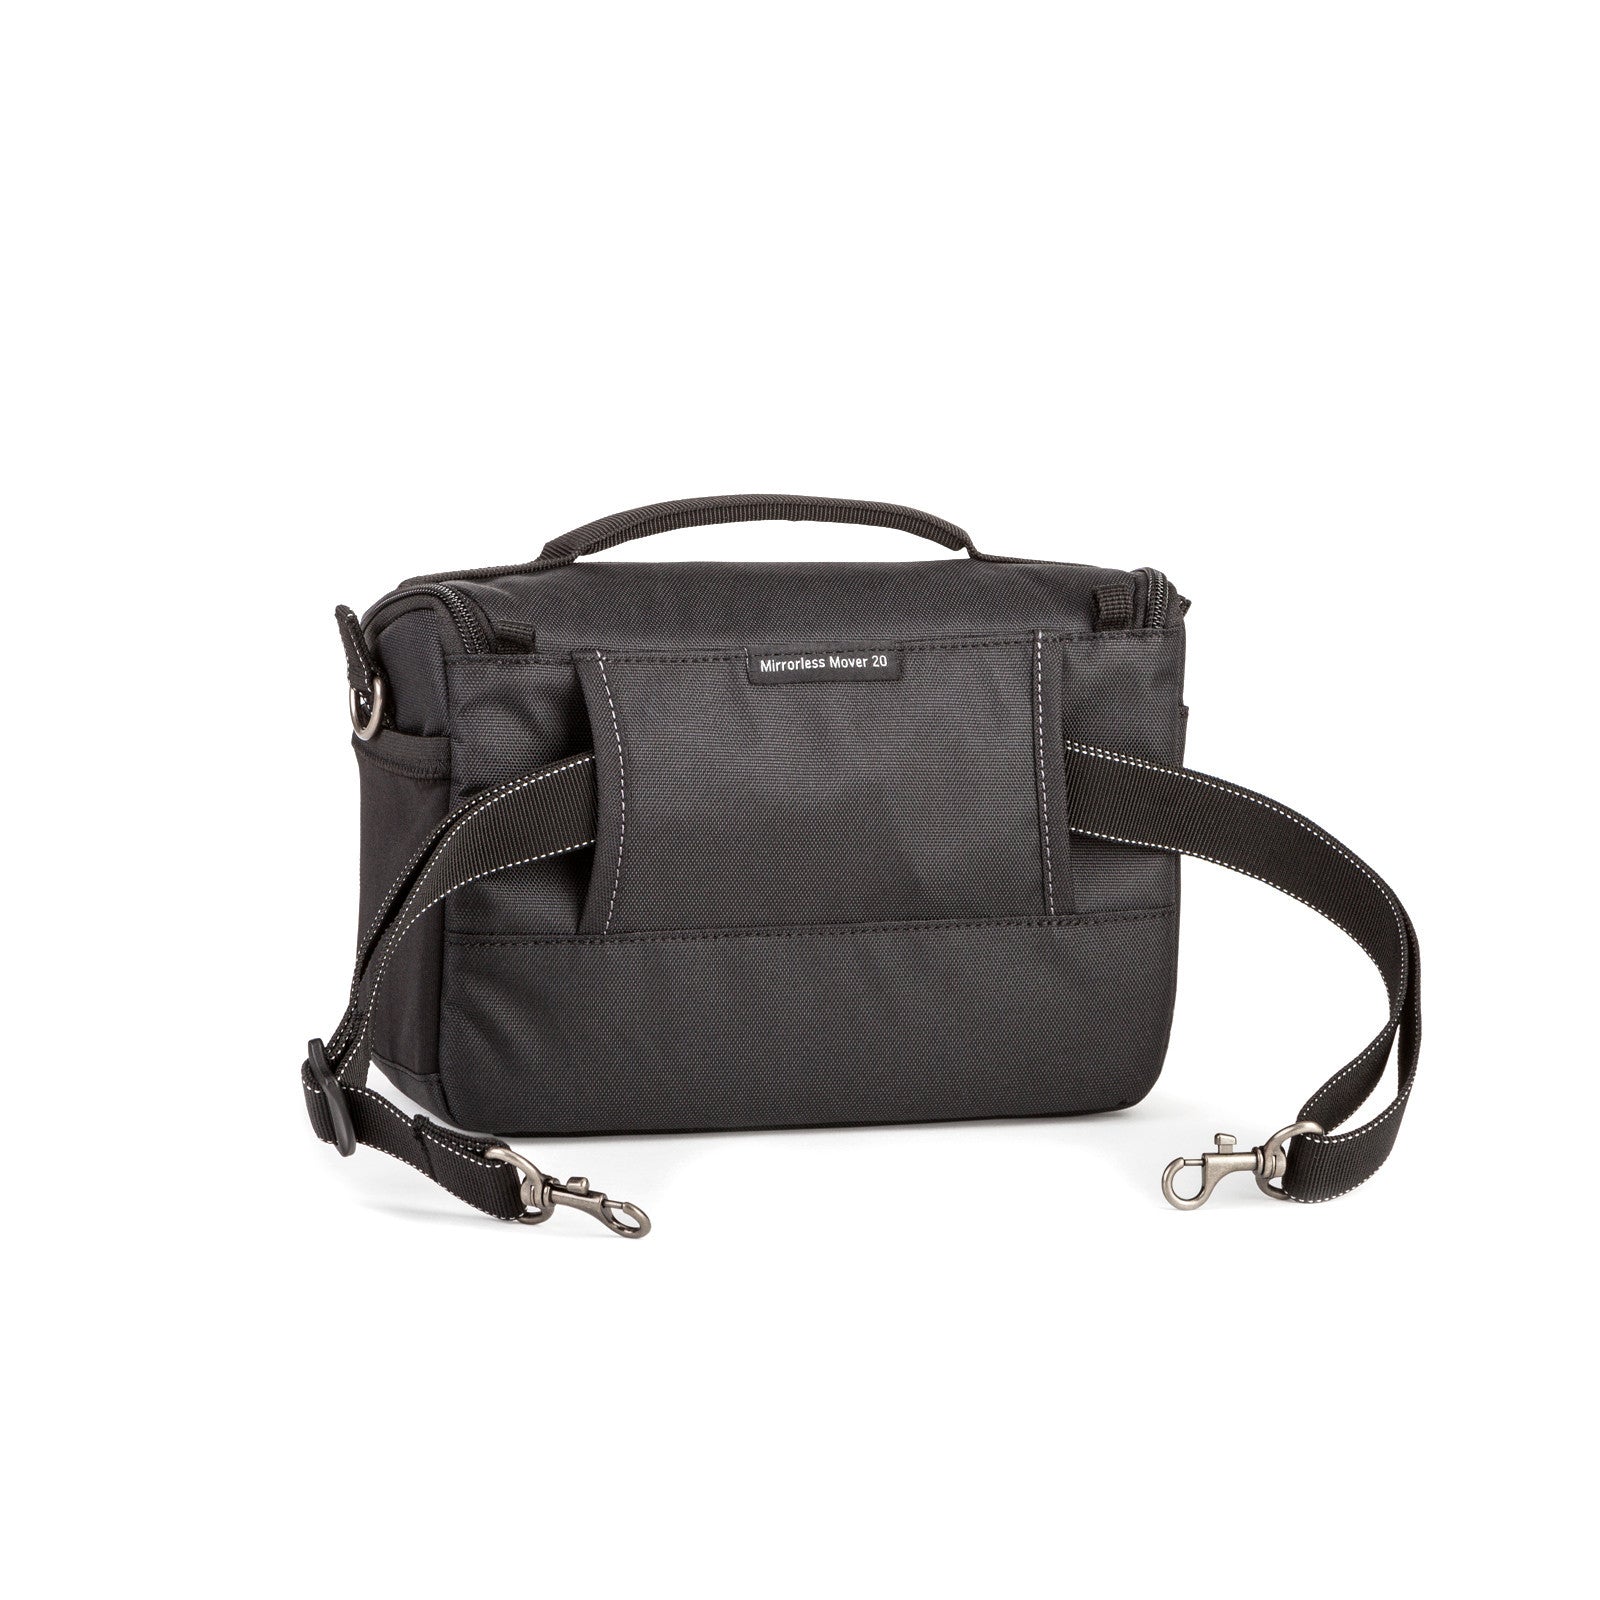 Think Tank Mirrorless Mover 20 Camera Bag (Charcoal), bags shoulder bags, Think Tank Photo - Pictureline  - 3